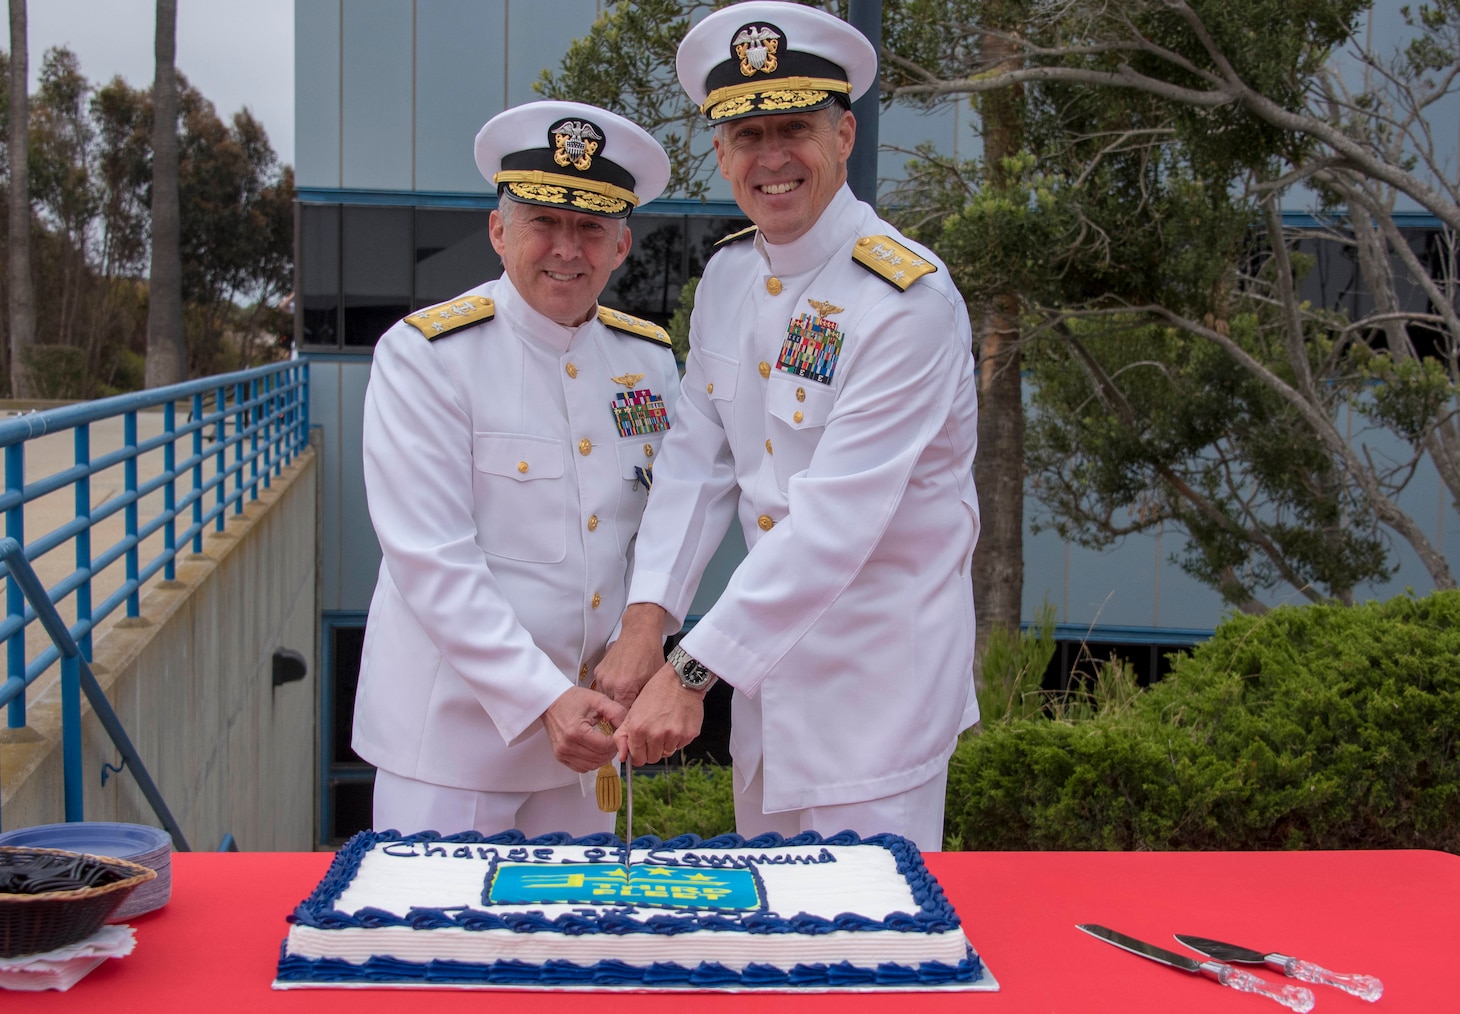 SAN DIEGO (June 3, 2021) Vice Adm. Stephen T. Koehler, right, commander, U.S. 3rd Fleet, and Vice Adm. Scott D. Conn cut a cake after their change of command ceremony on Naval Base Point Loma, June 3. Koehler relieved Conn as Commander, U.S. 3rd Fleet. (U.S. Navy photo by Mass Communication Specialist 2nd Class Jessica Hale)